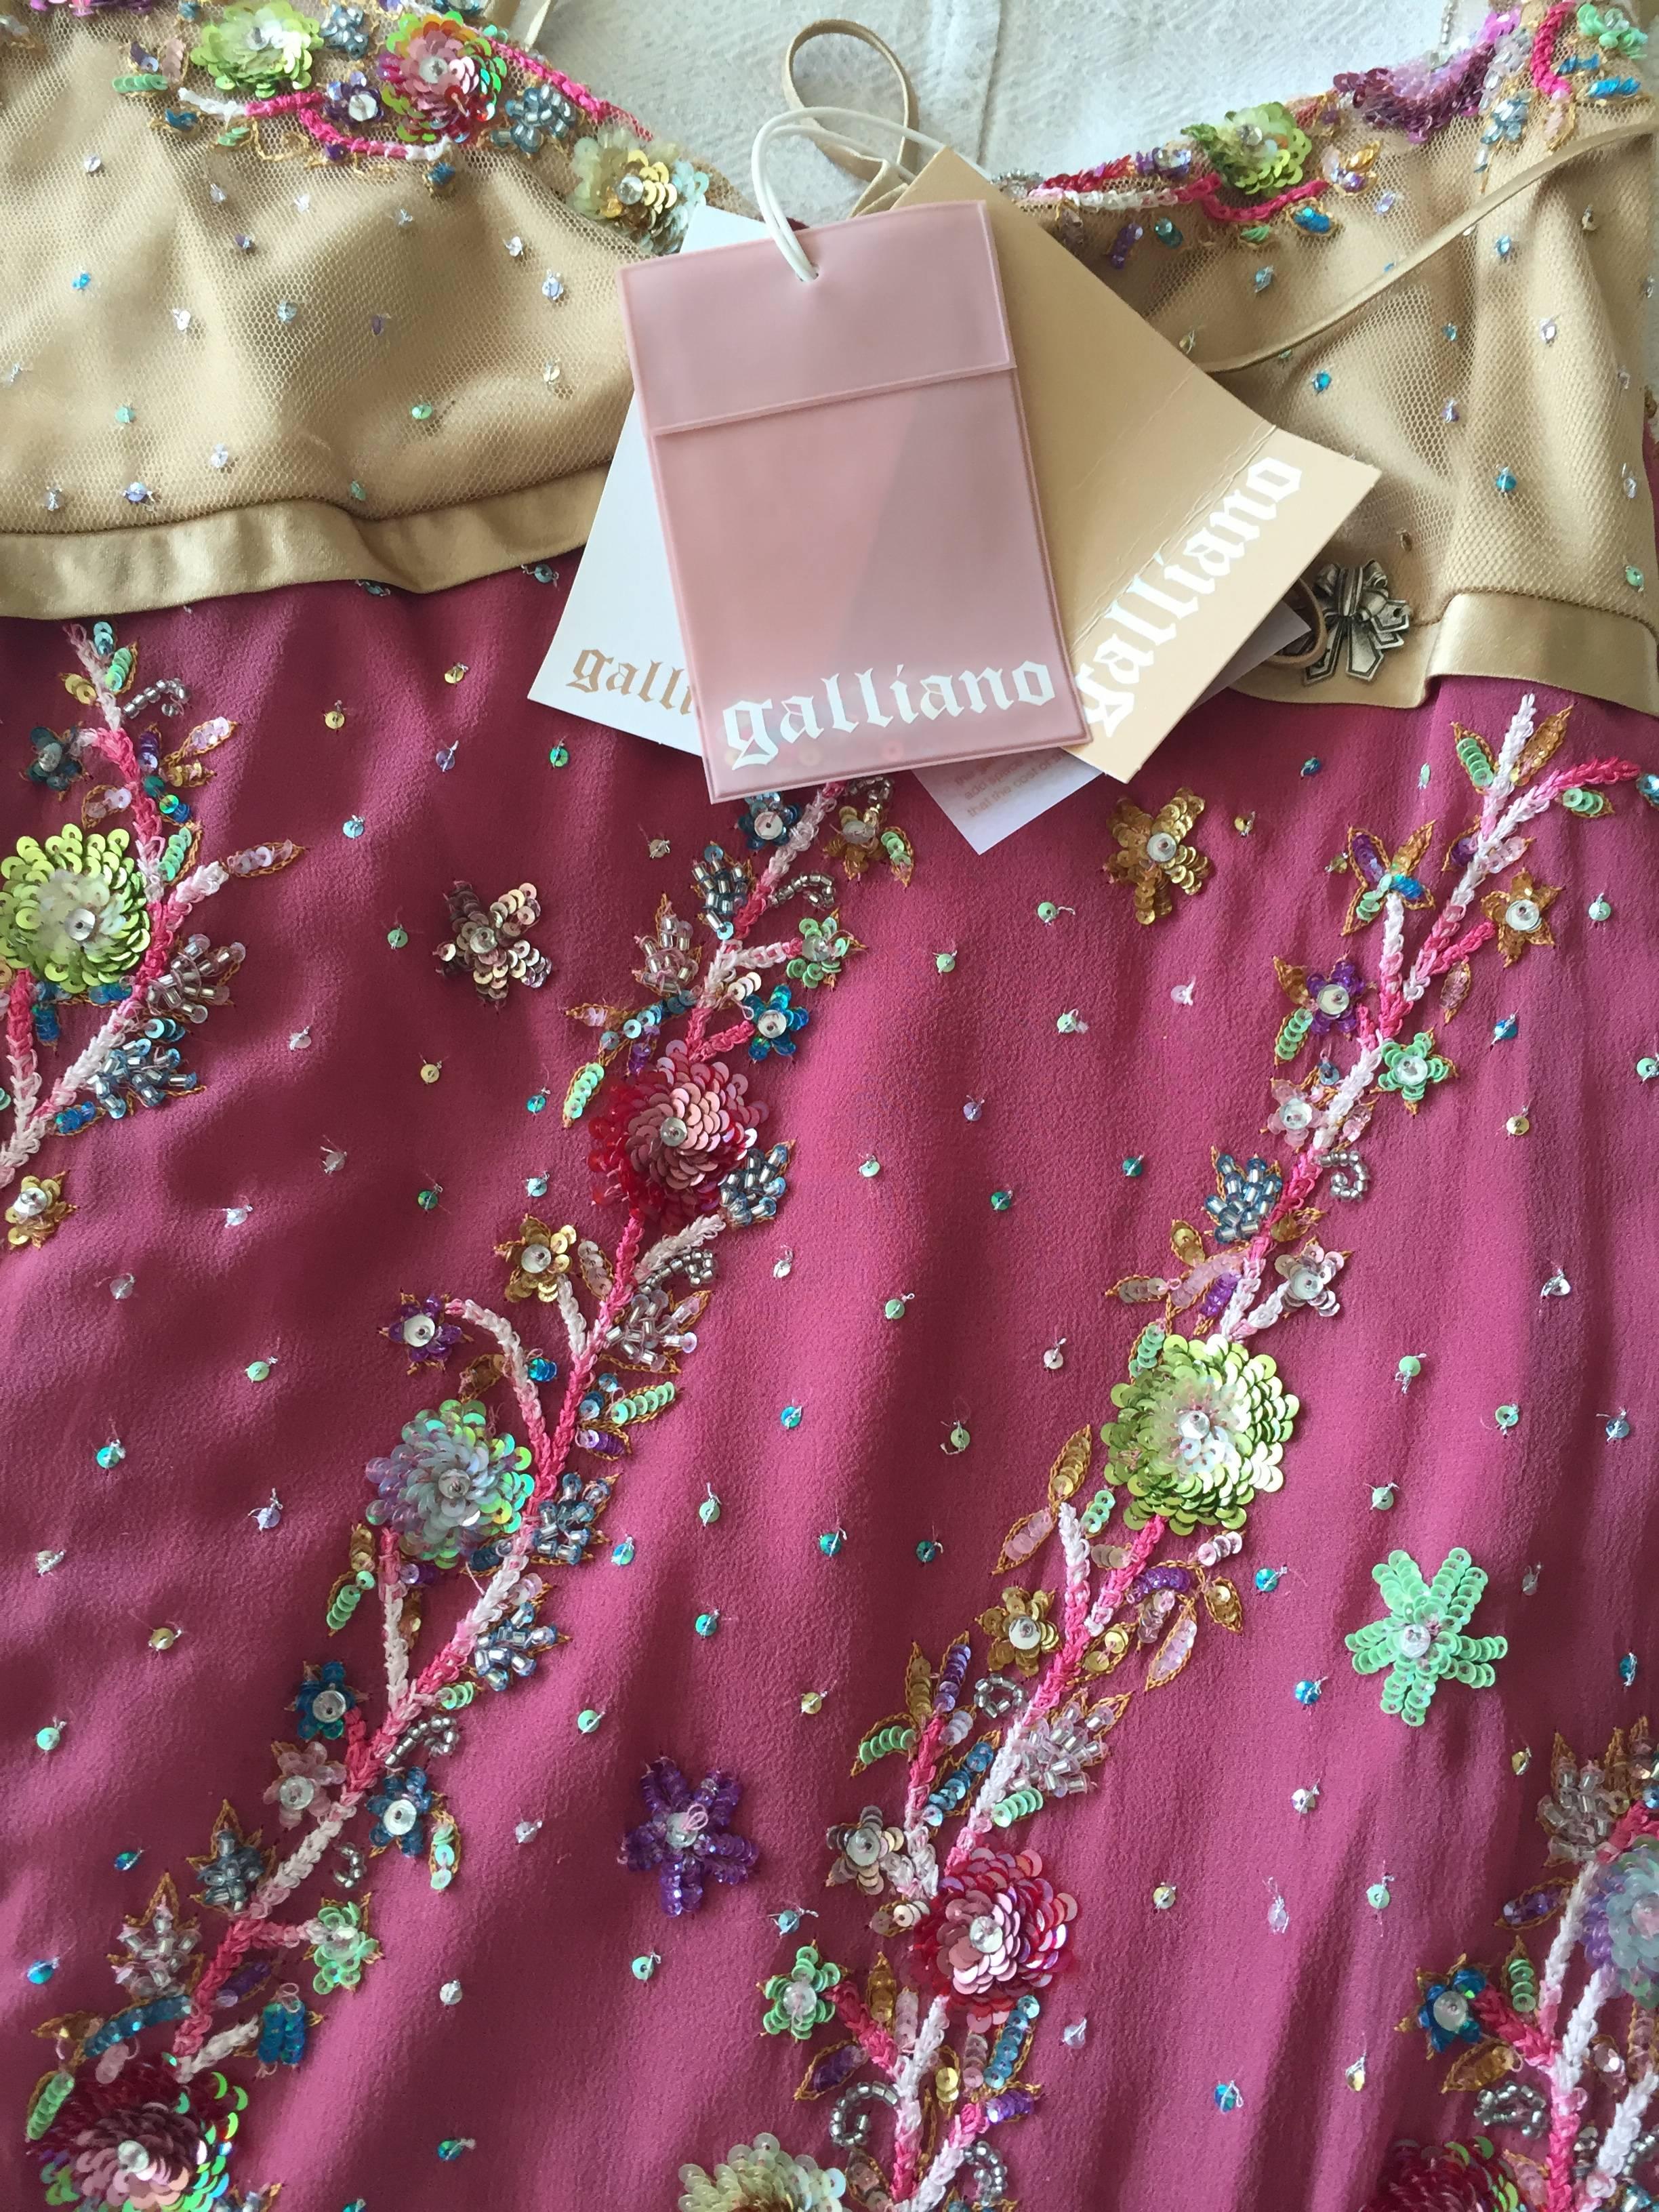 John Galliano Mini Dress with Floral Sequin Details New 5